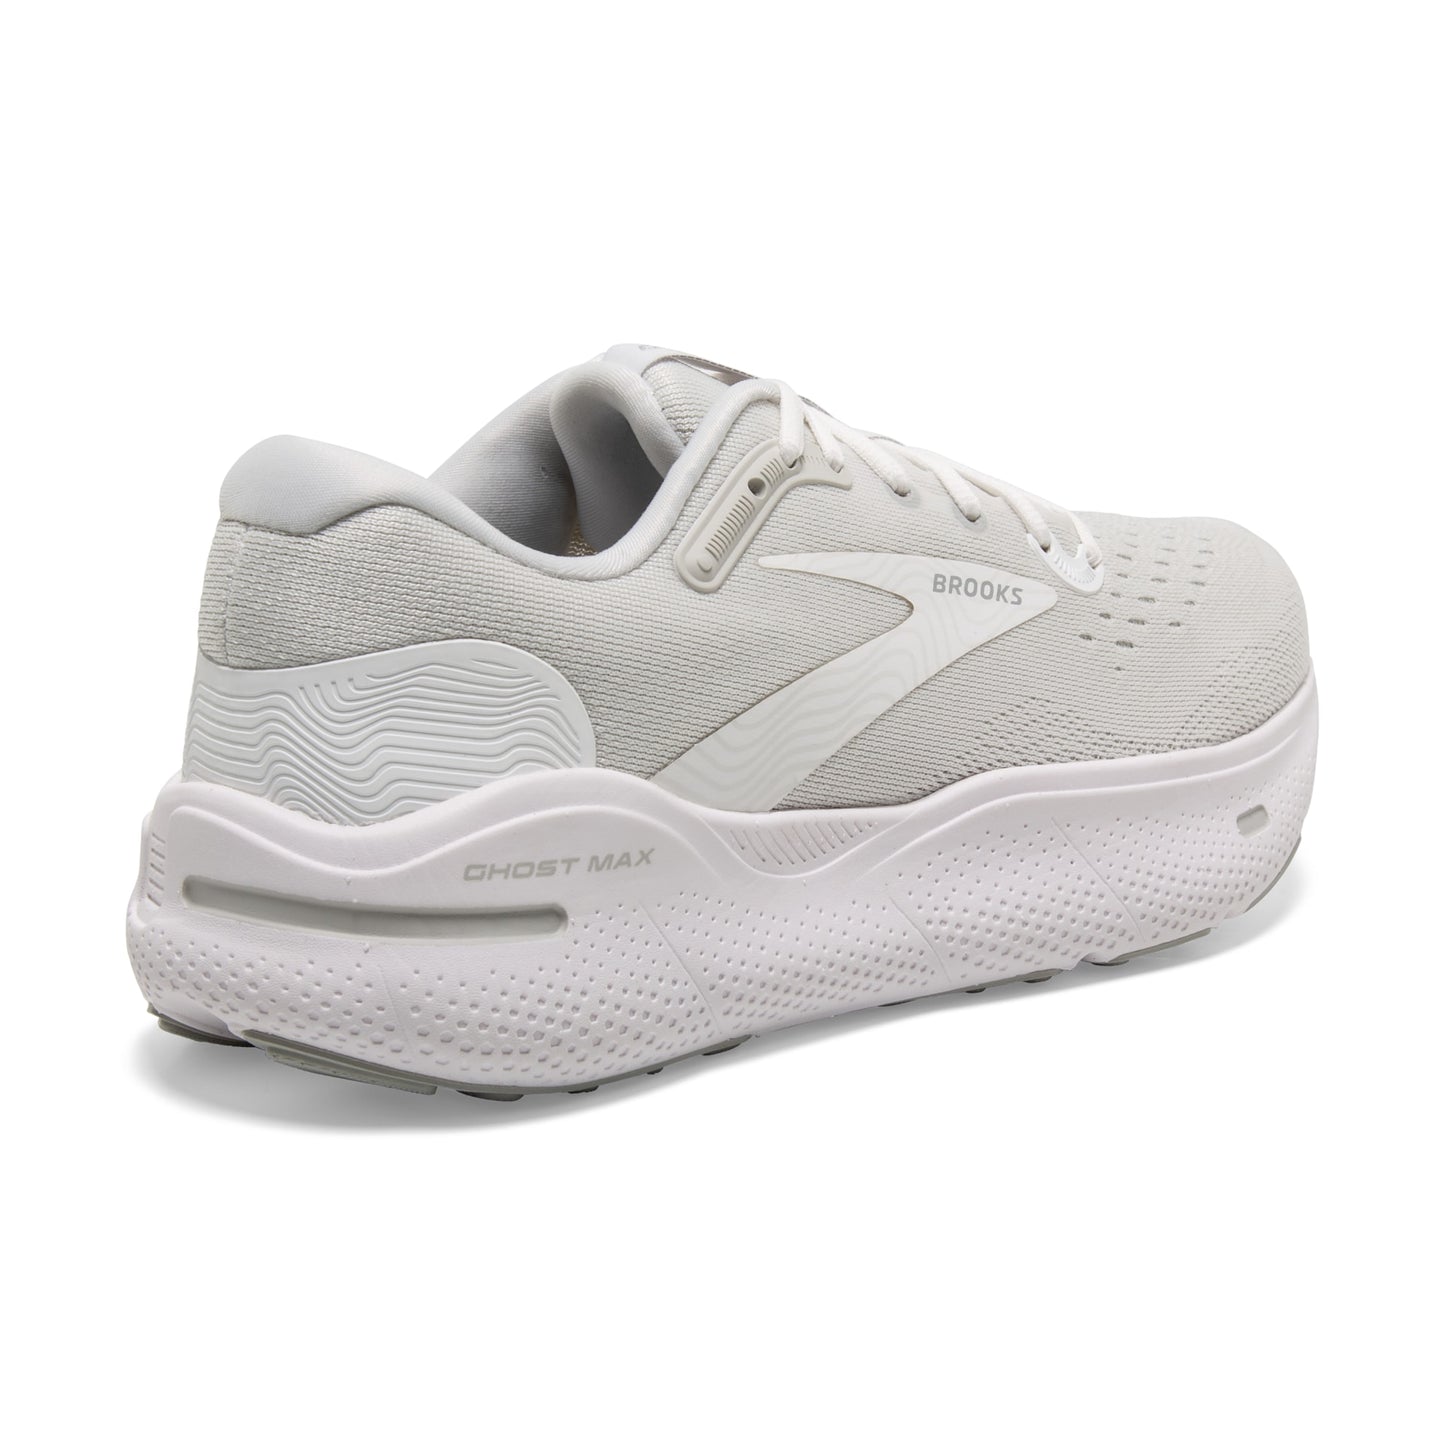 Ghost Max femmes 124 White/Oyster/Metallic Silver